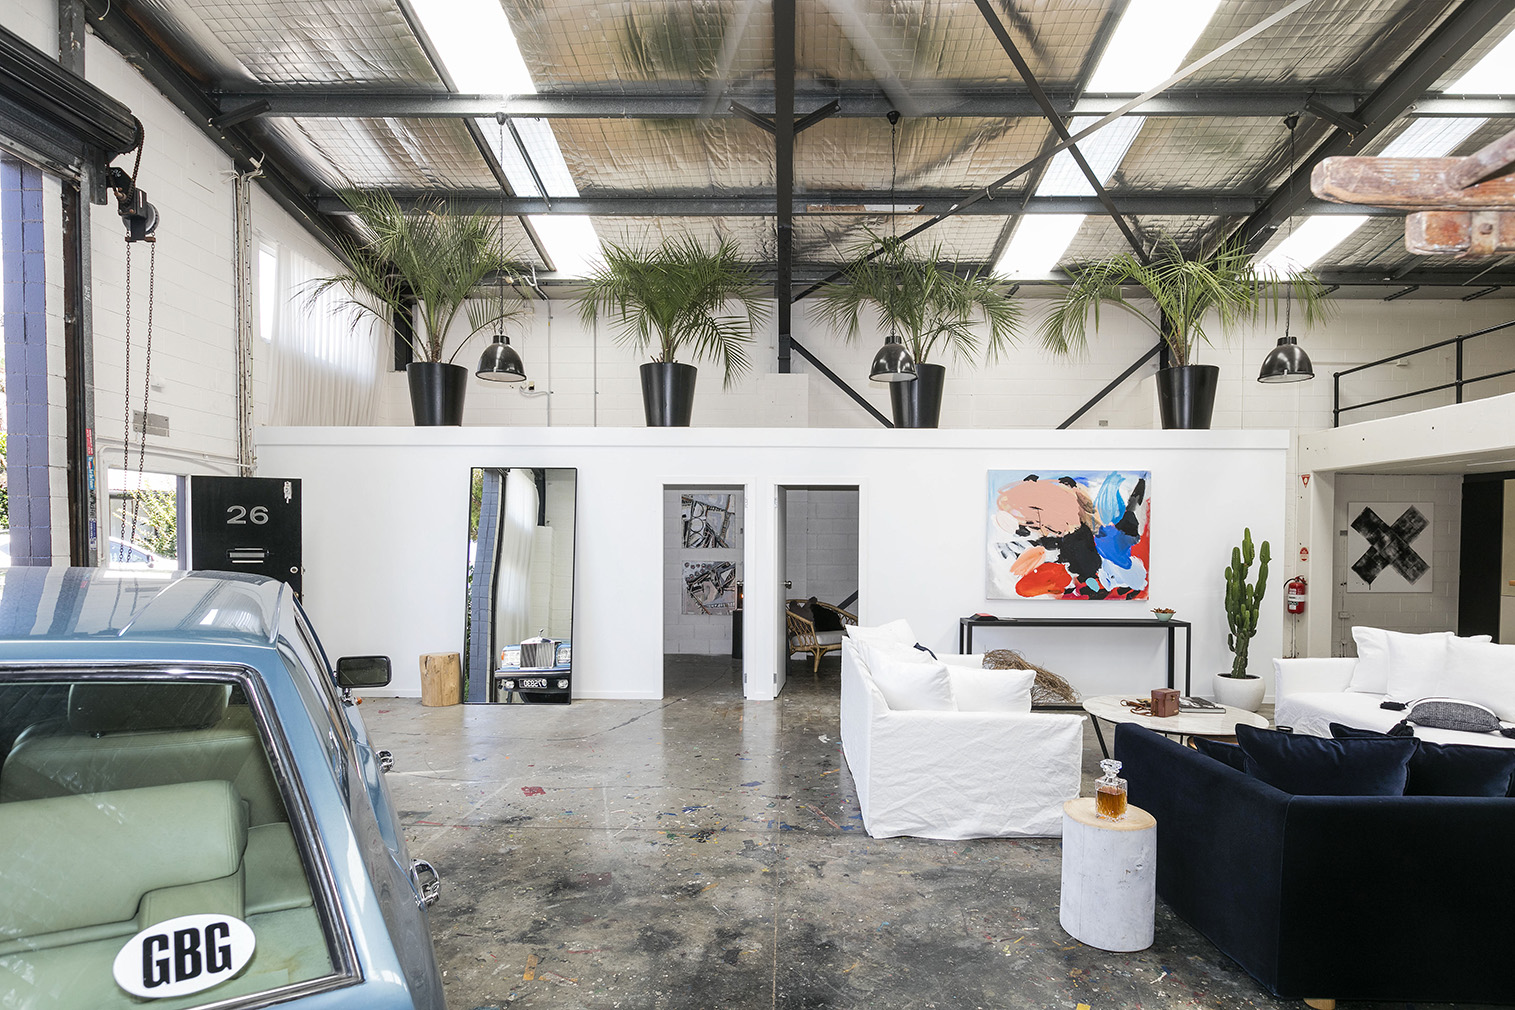 A raw live/work warehouse is headed for auction in Sydney